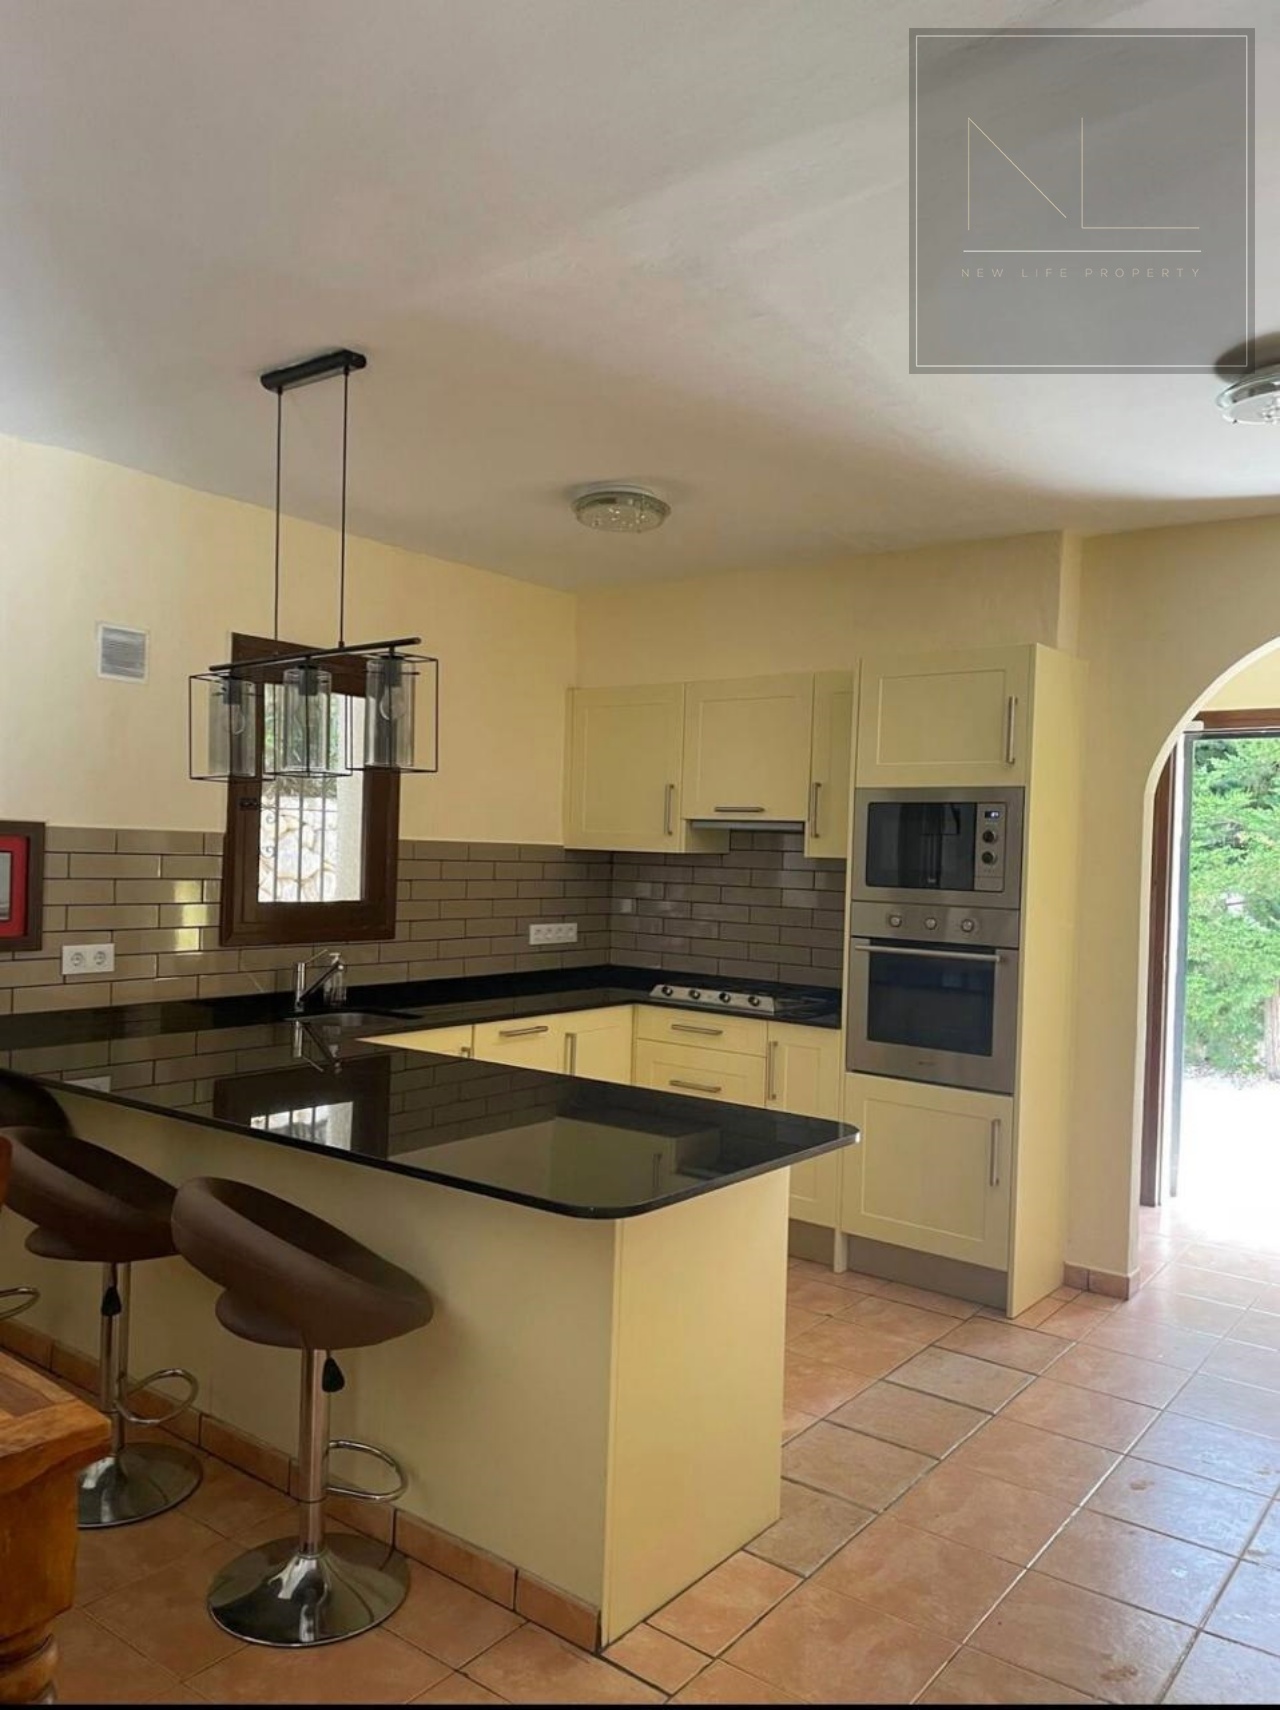 Detached Villa For Sale in Calpe